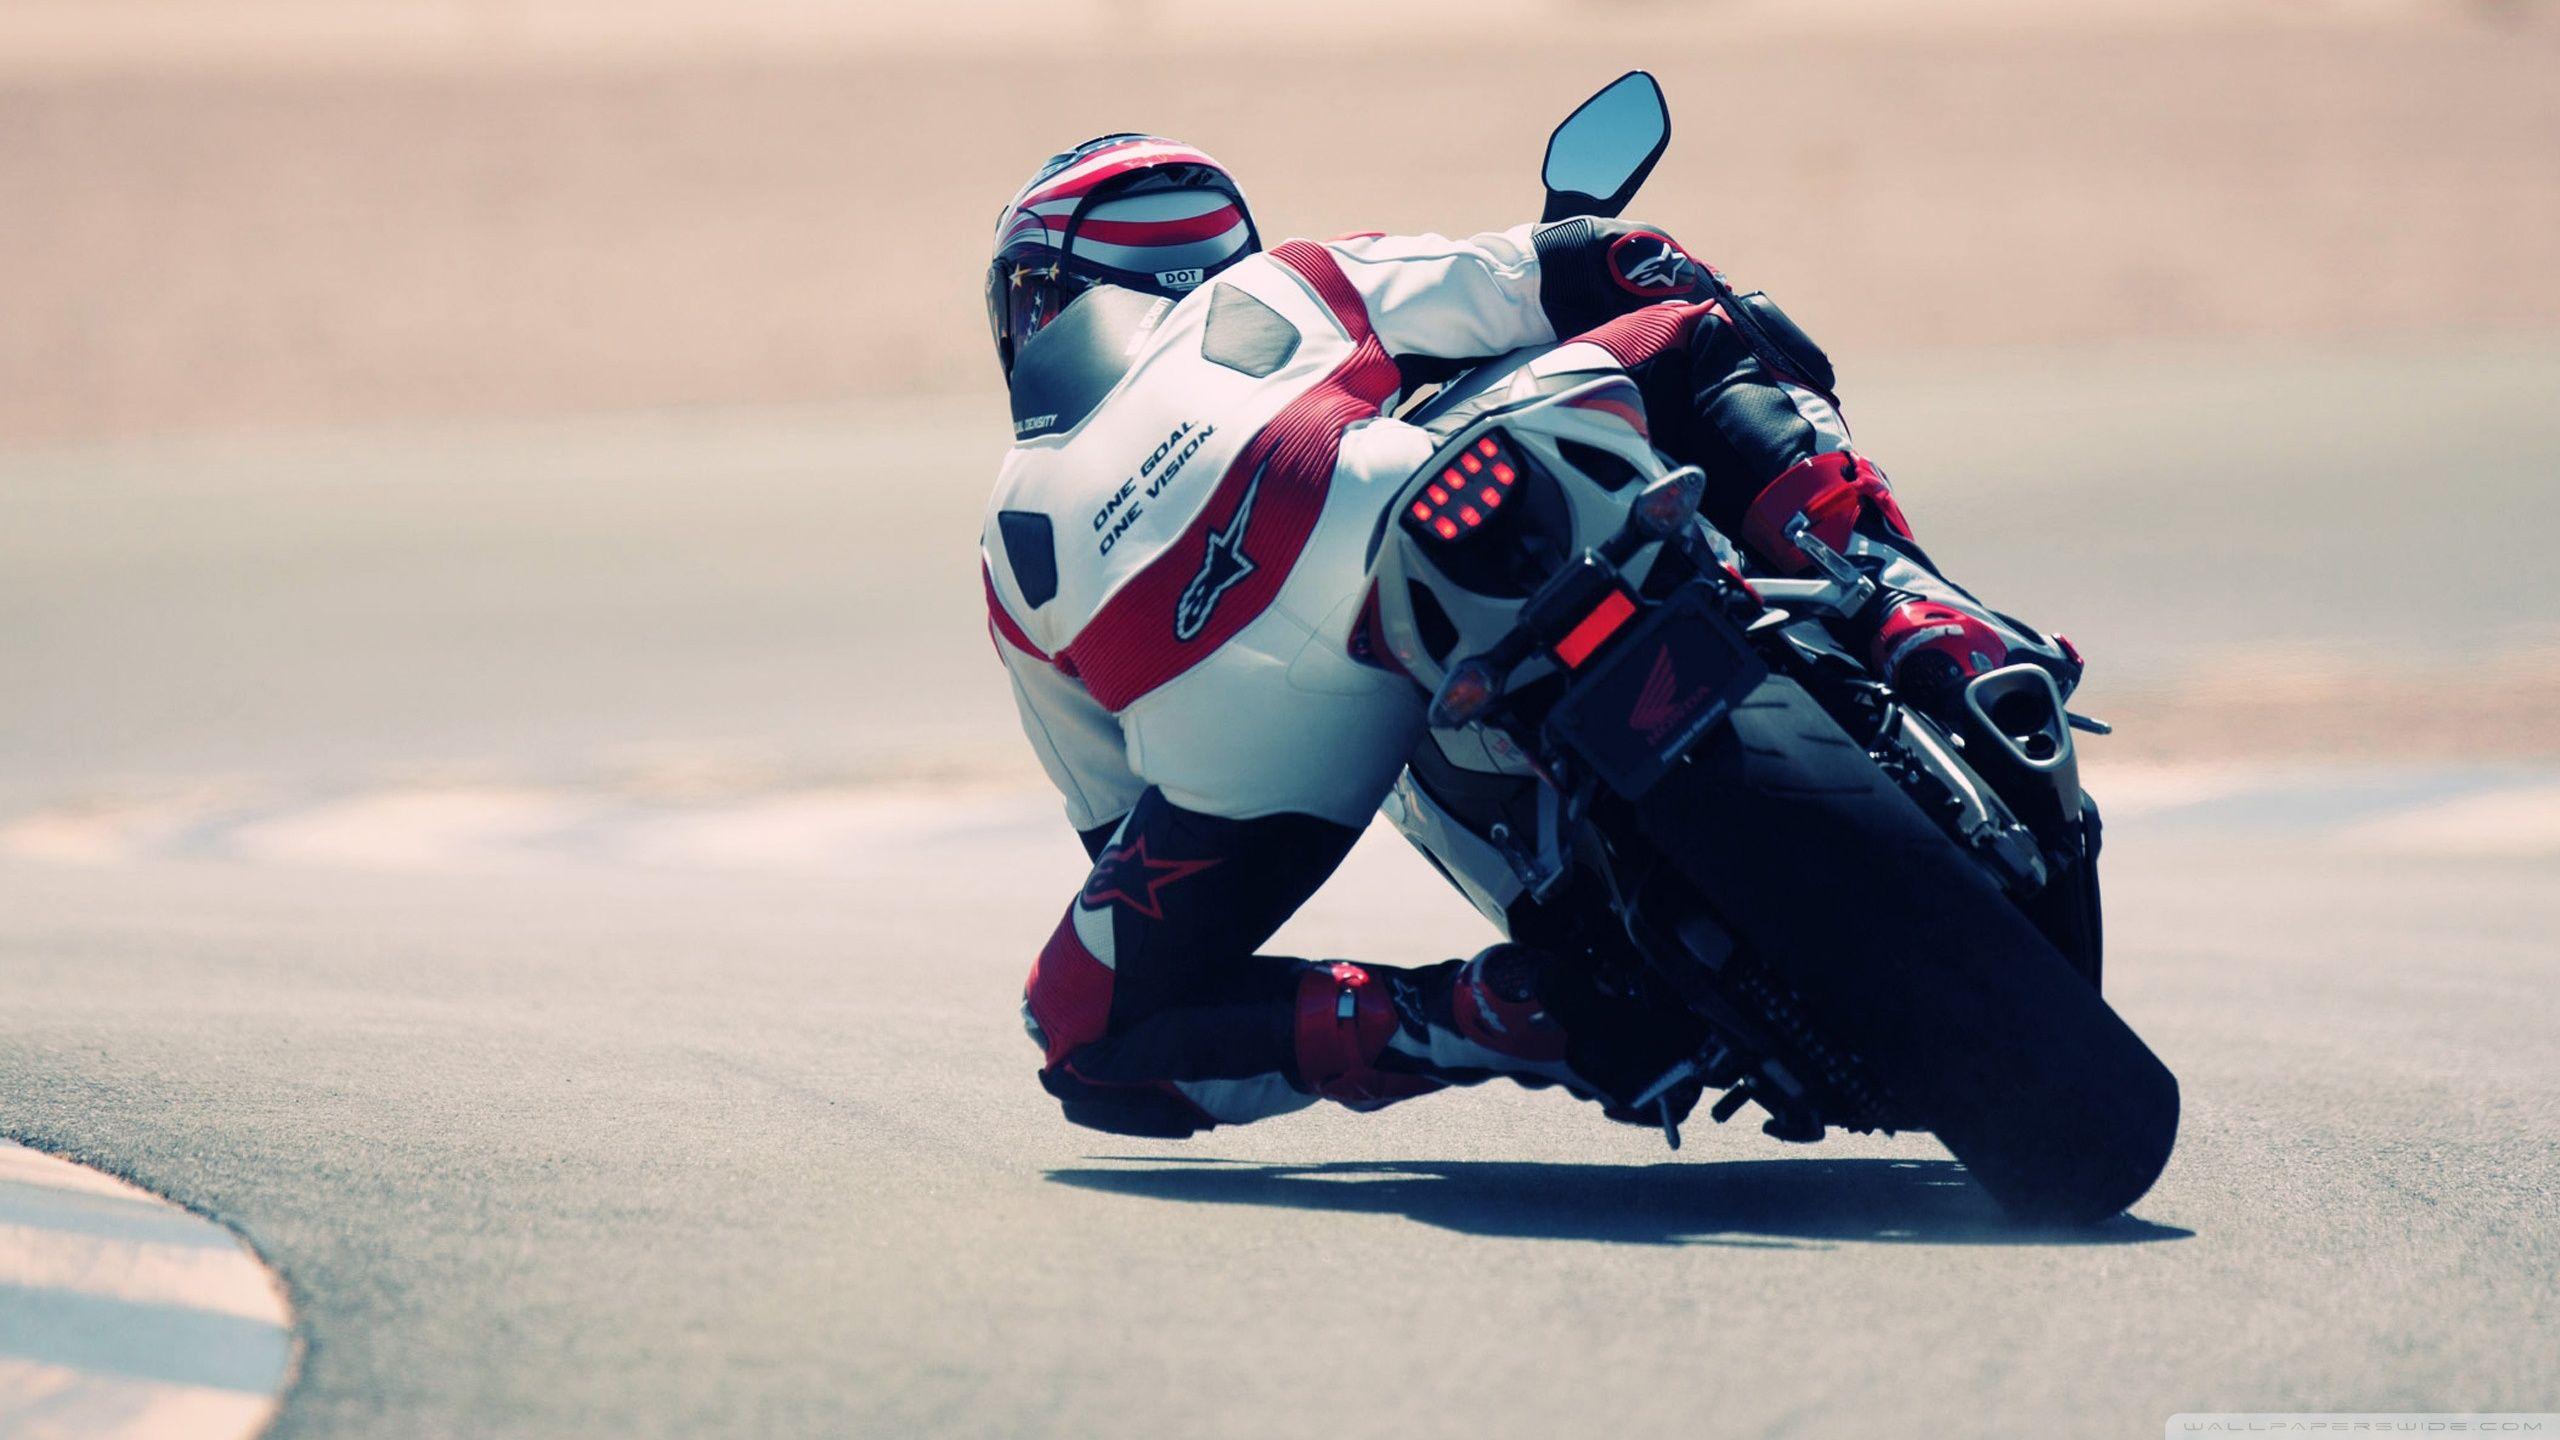 Motorcycle Racing Wallpaper and Background Image